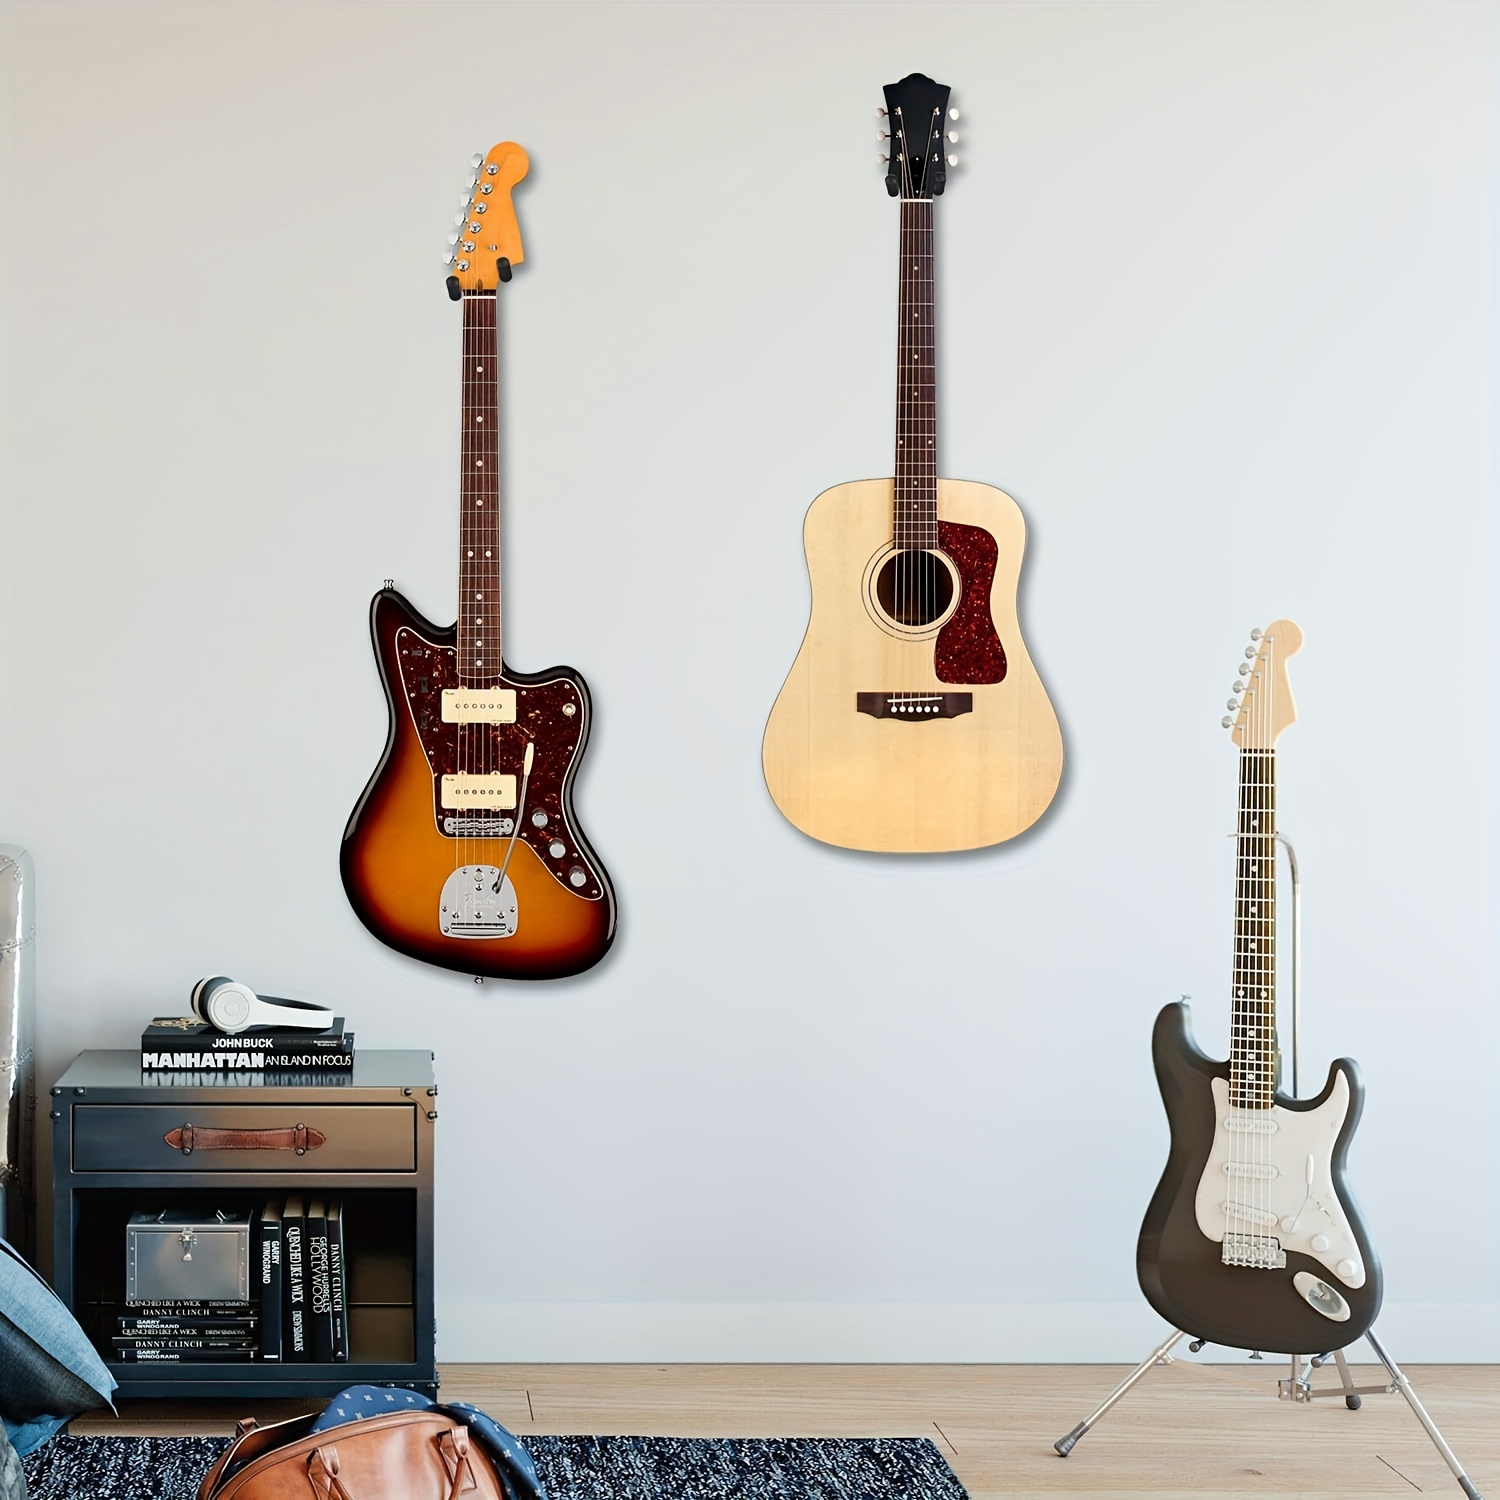 Guitar Wall Mount 3-Piece, Guitar Hanger With Rotatable Soft Guitar Stand  For All Guitar Sizes, Solid Metal U-Shaped Guitar Wall Mount For Acoustic El